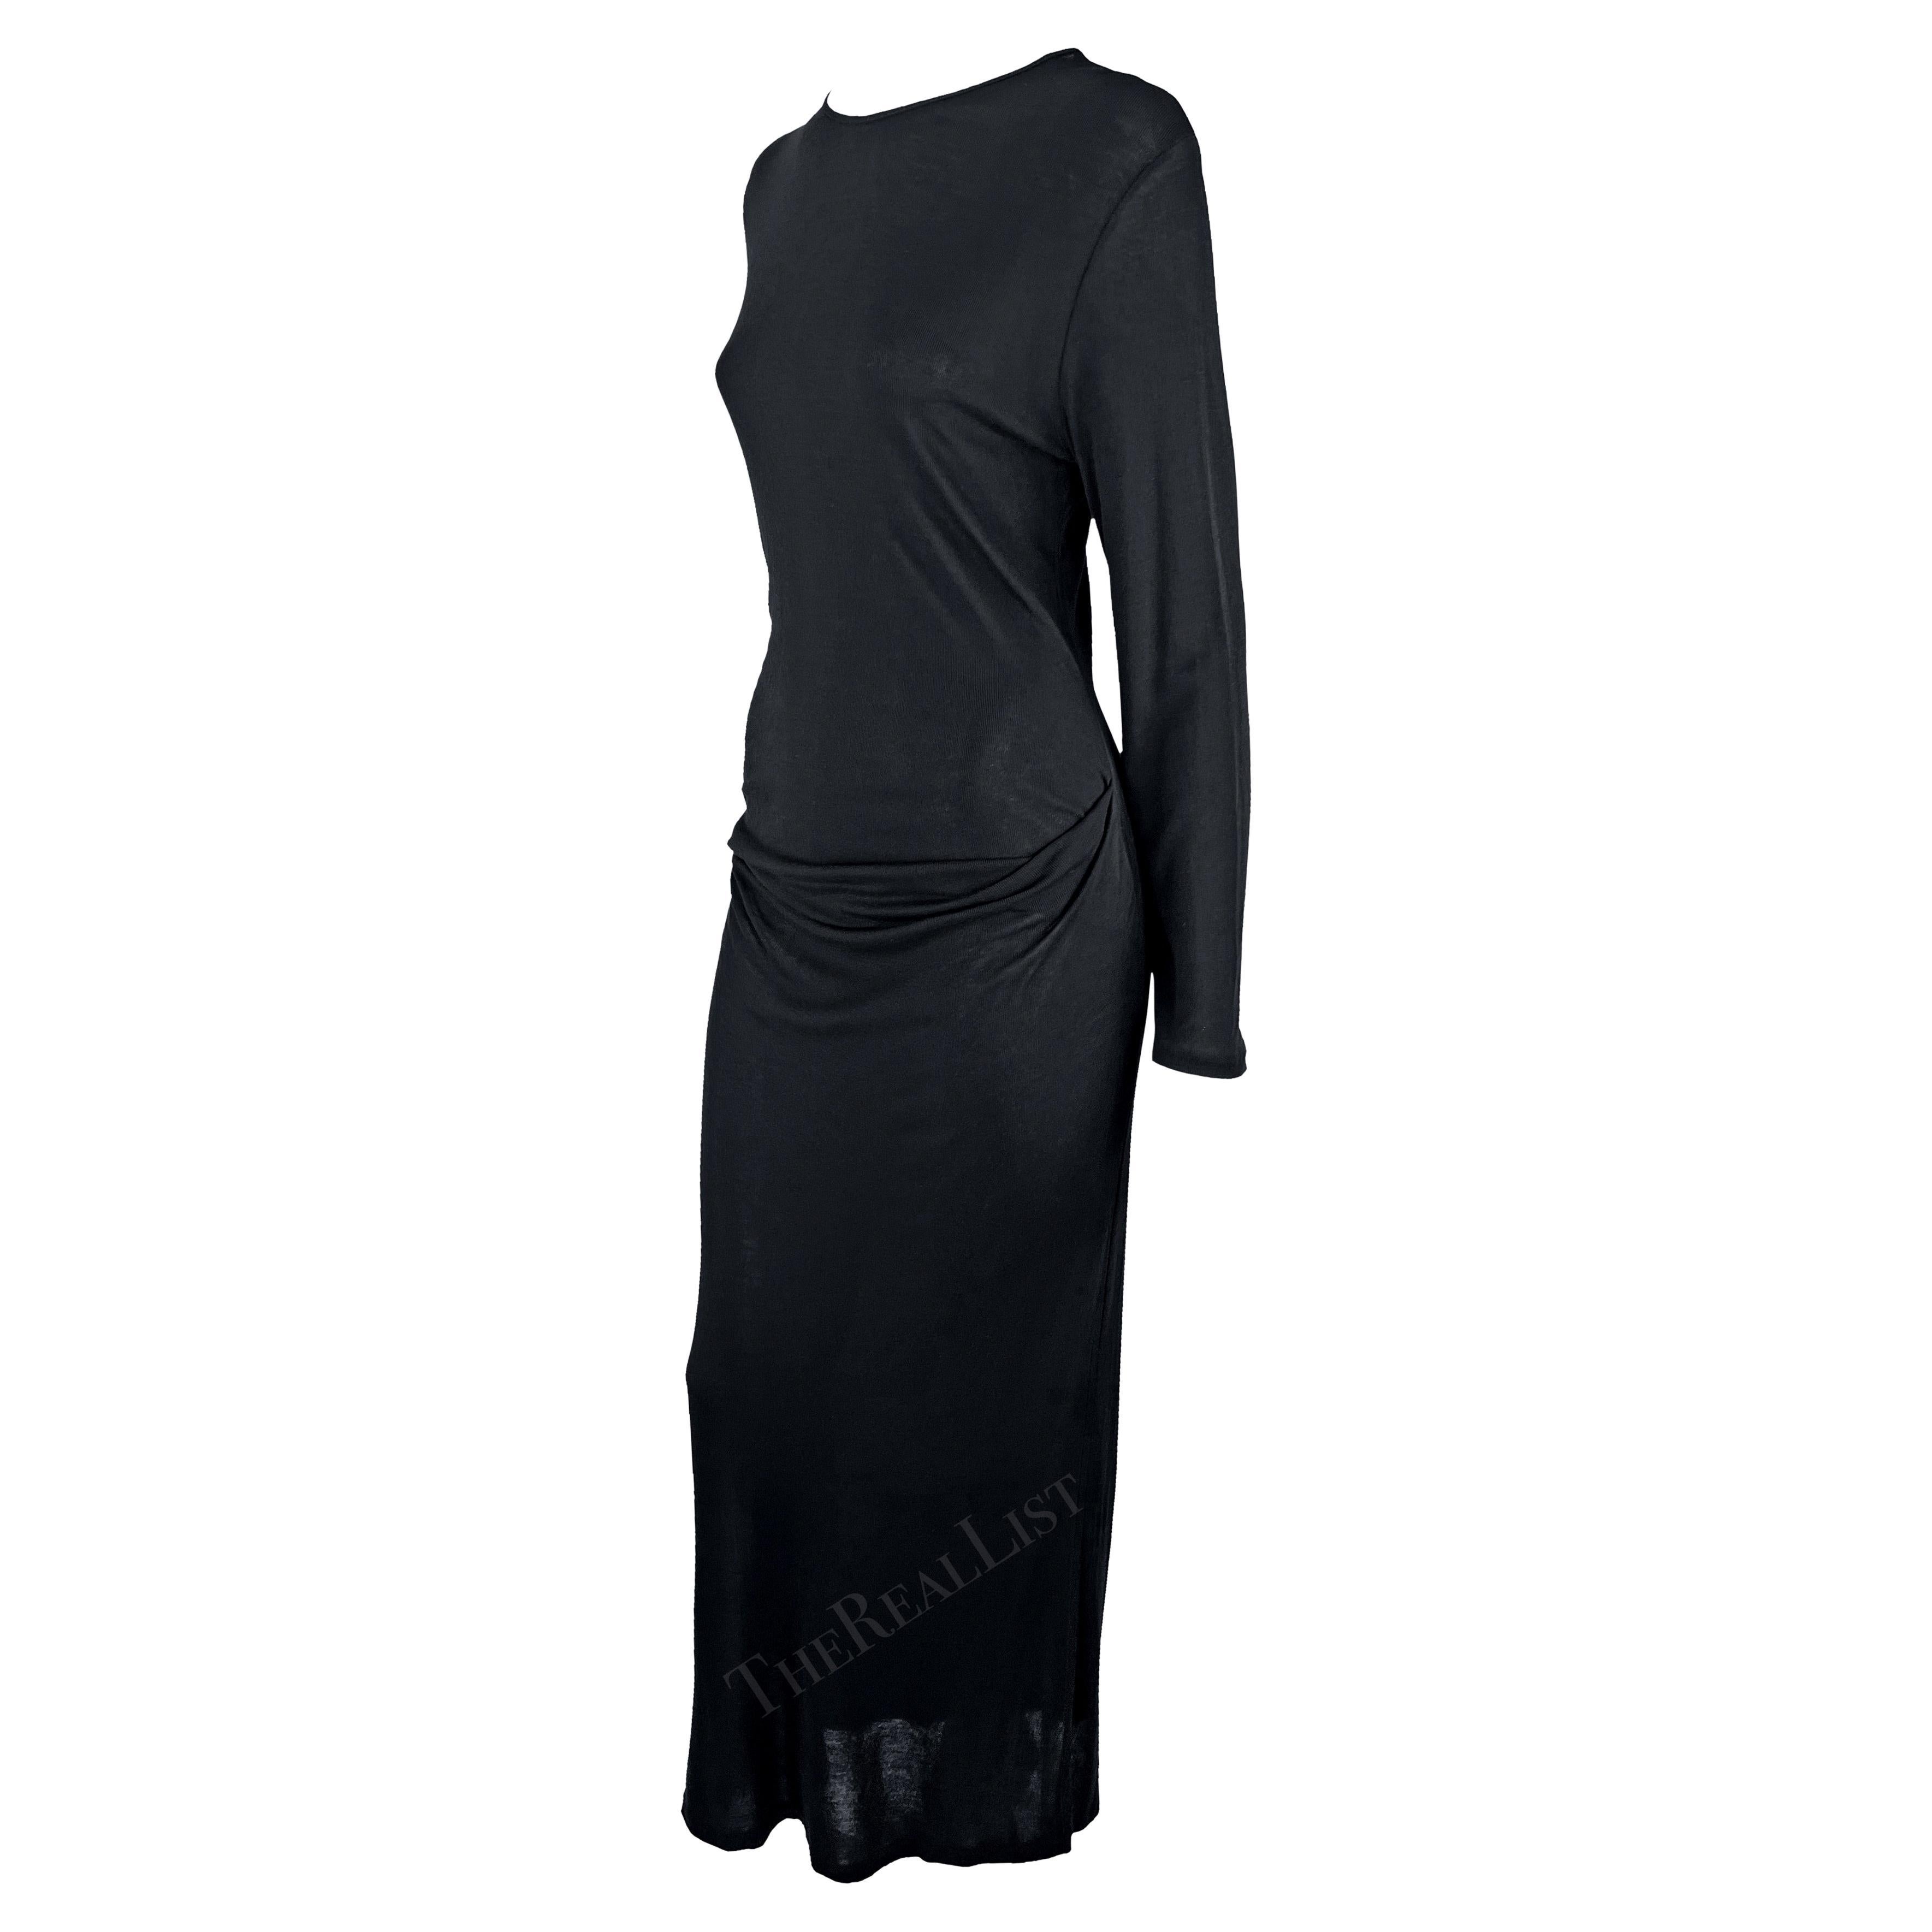 Presenting a chic black knit Ann Demeulemeester gown. From the 1990s, this very lightly sheer floor-length dress features long sleeves and is made complete with light ruching at the hips. This sensual dark dress is the perfect form-fitting addition